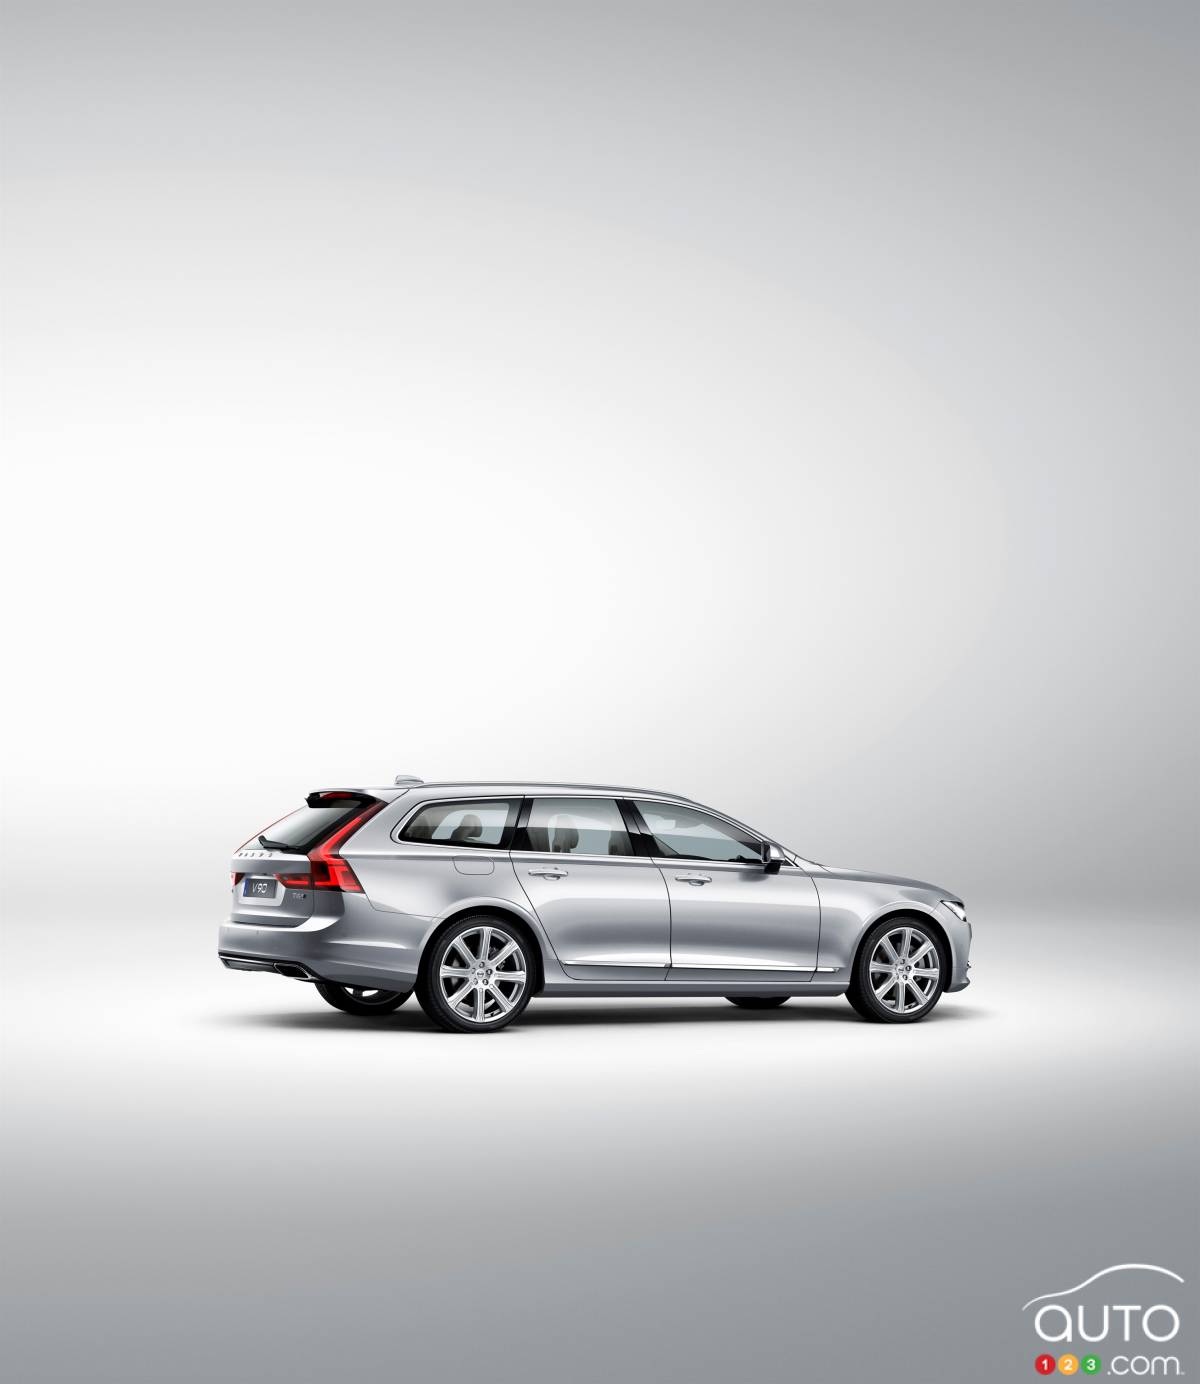 All-new Volvo V90 wagon unveiled in Sweden